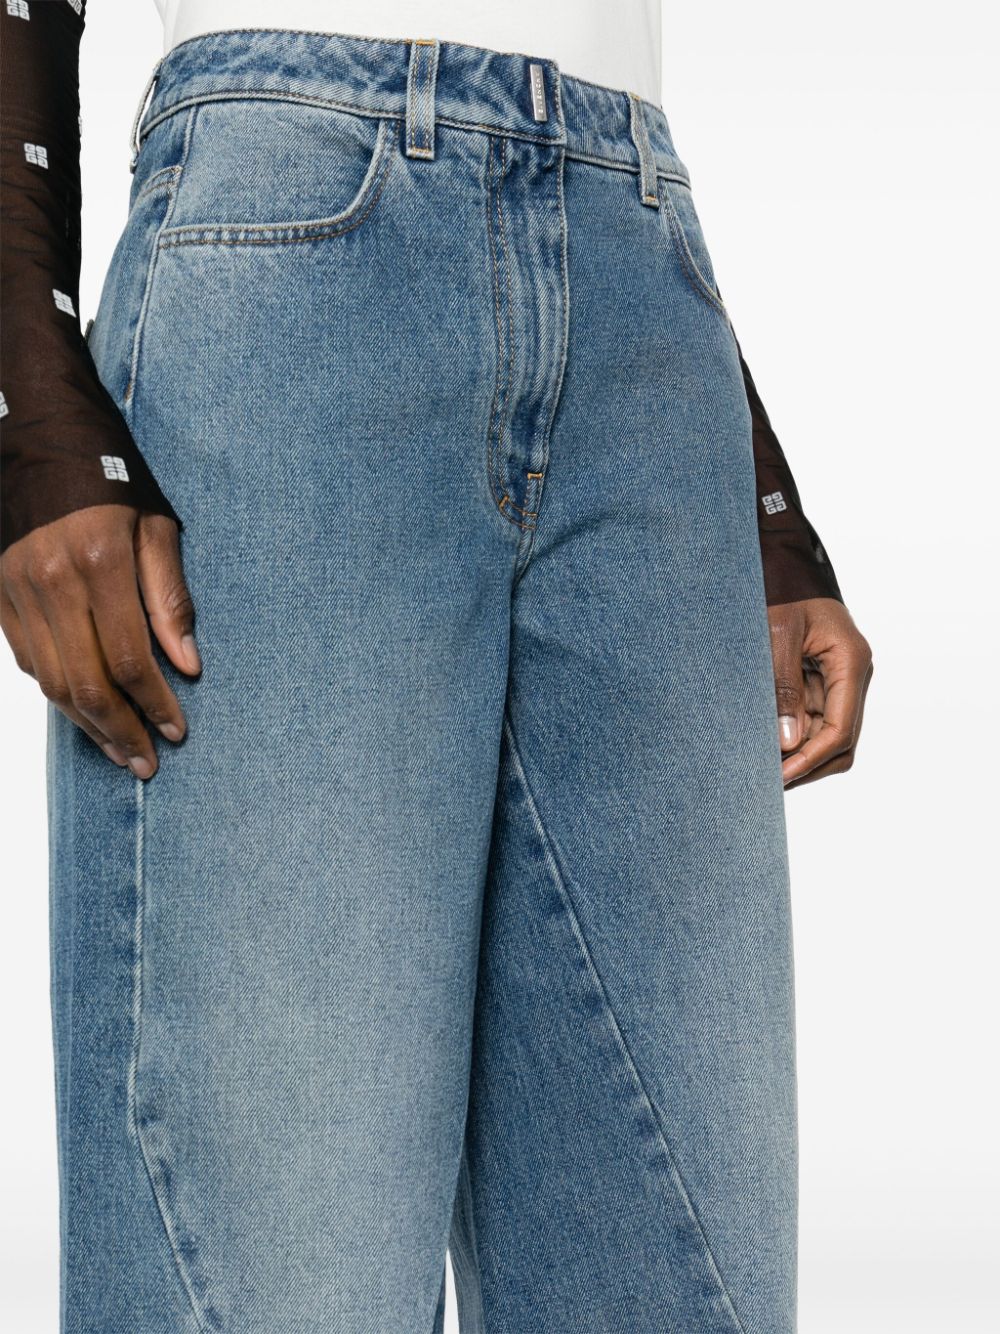 Givenchy Jeans Clear Blue